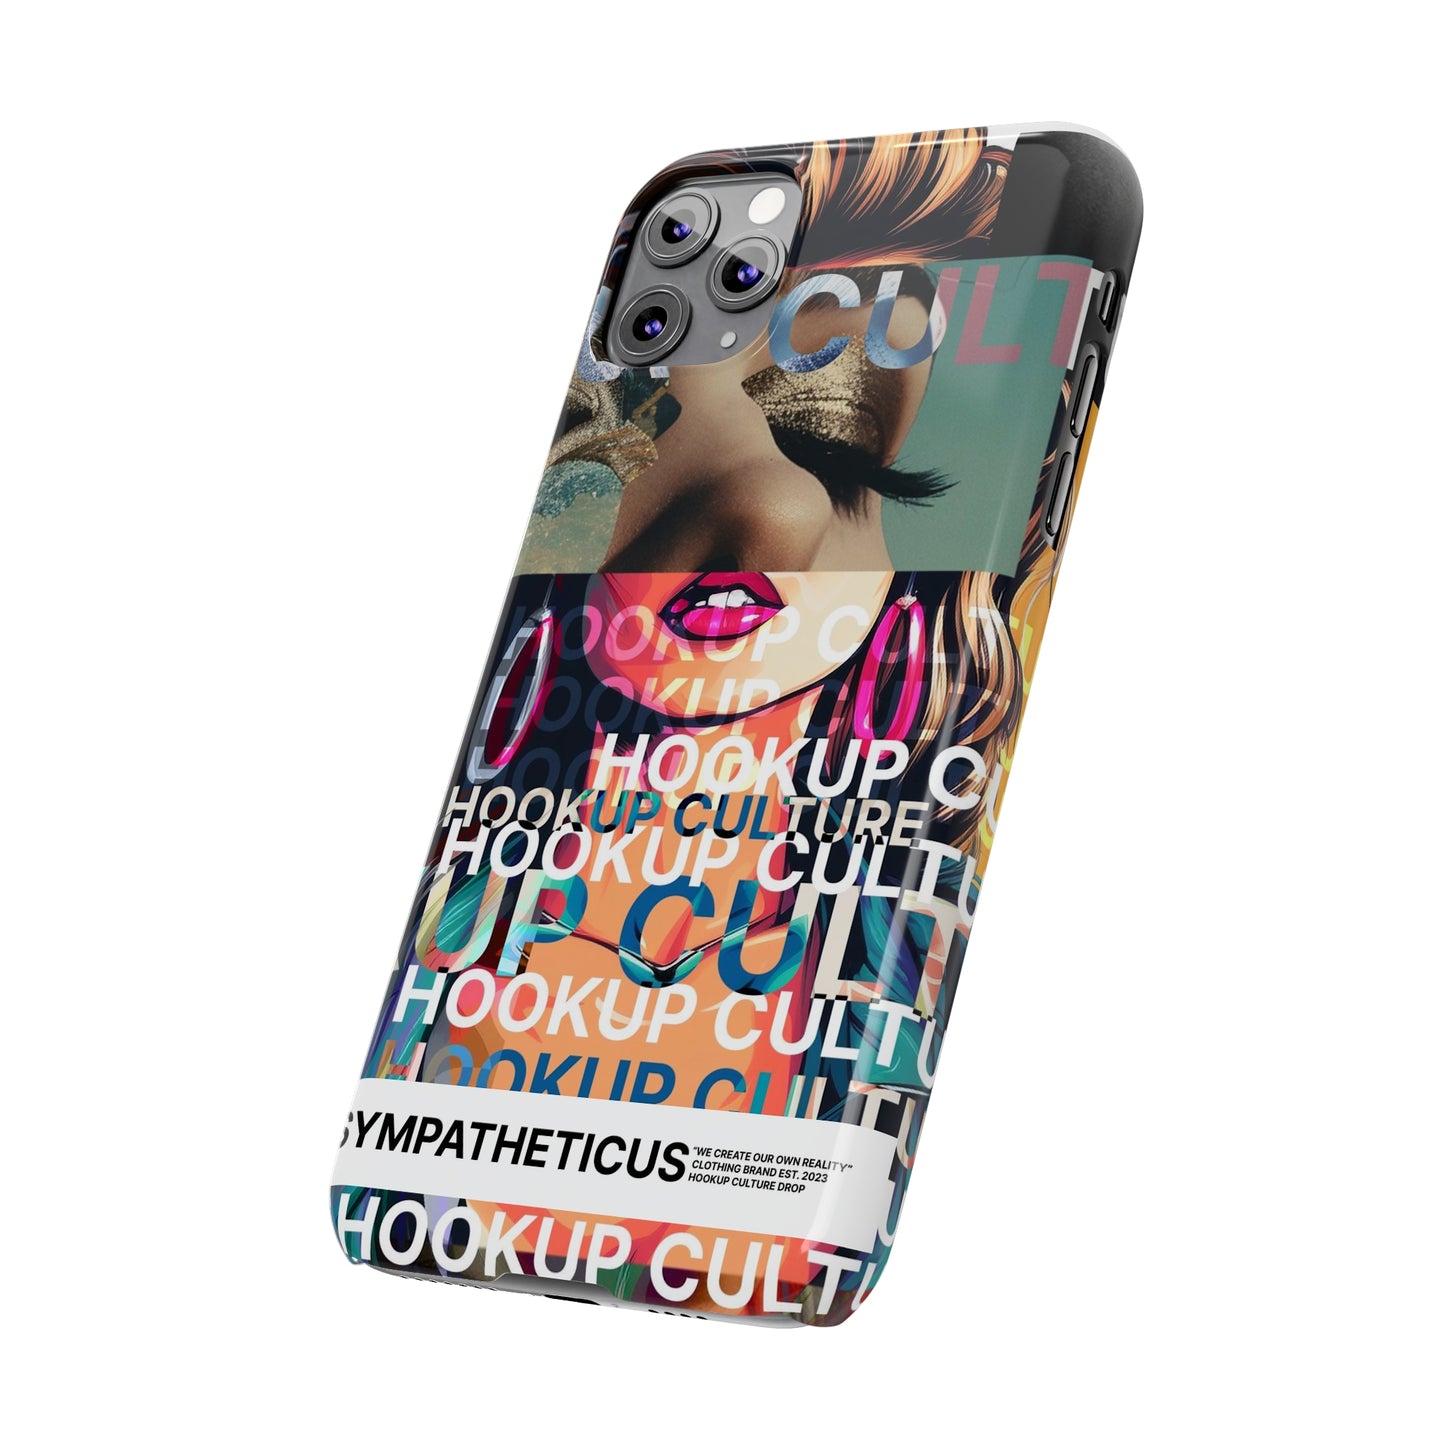 Hookup culture special iphone case-03